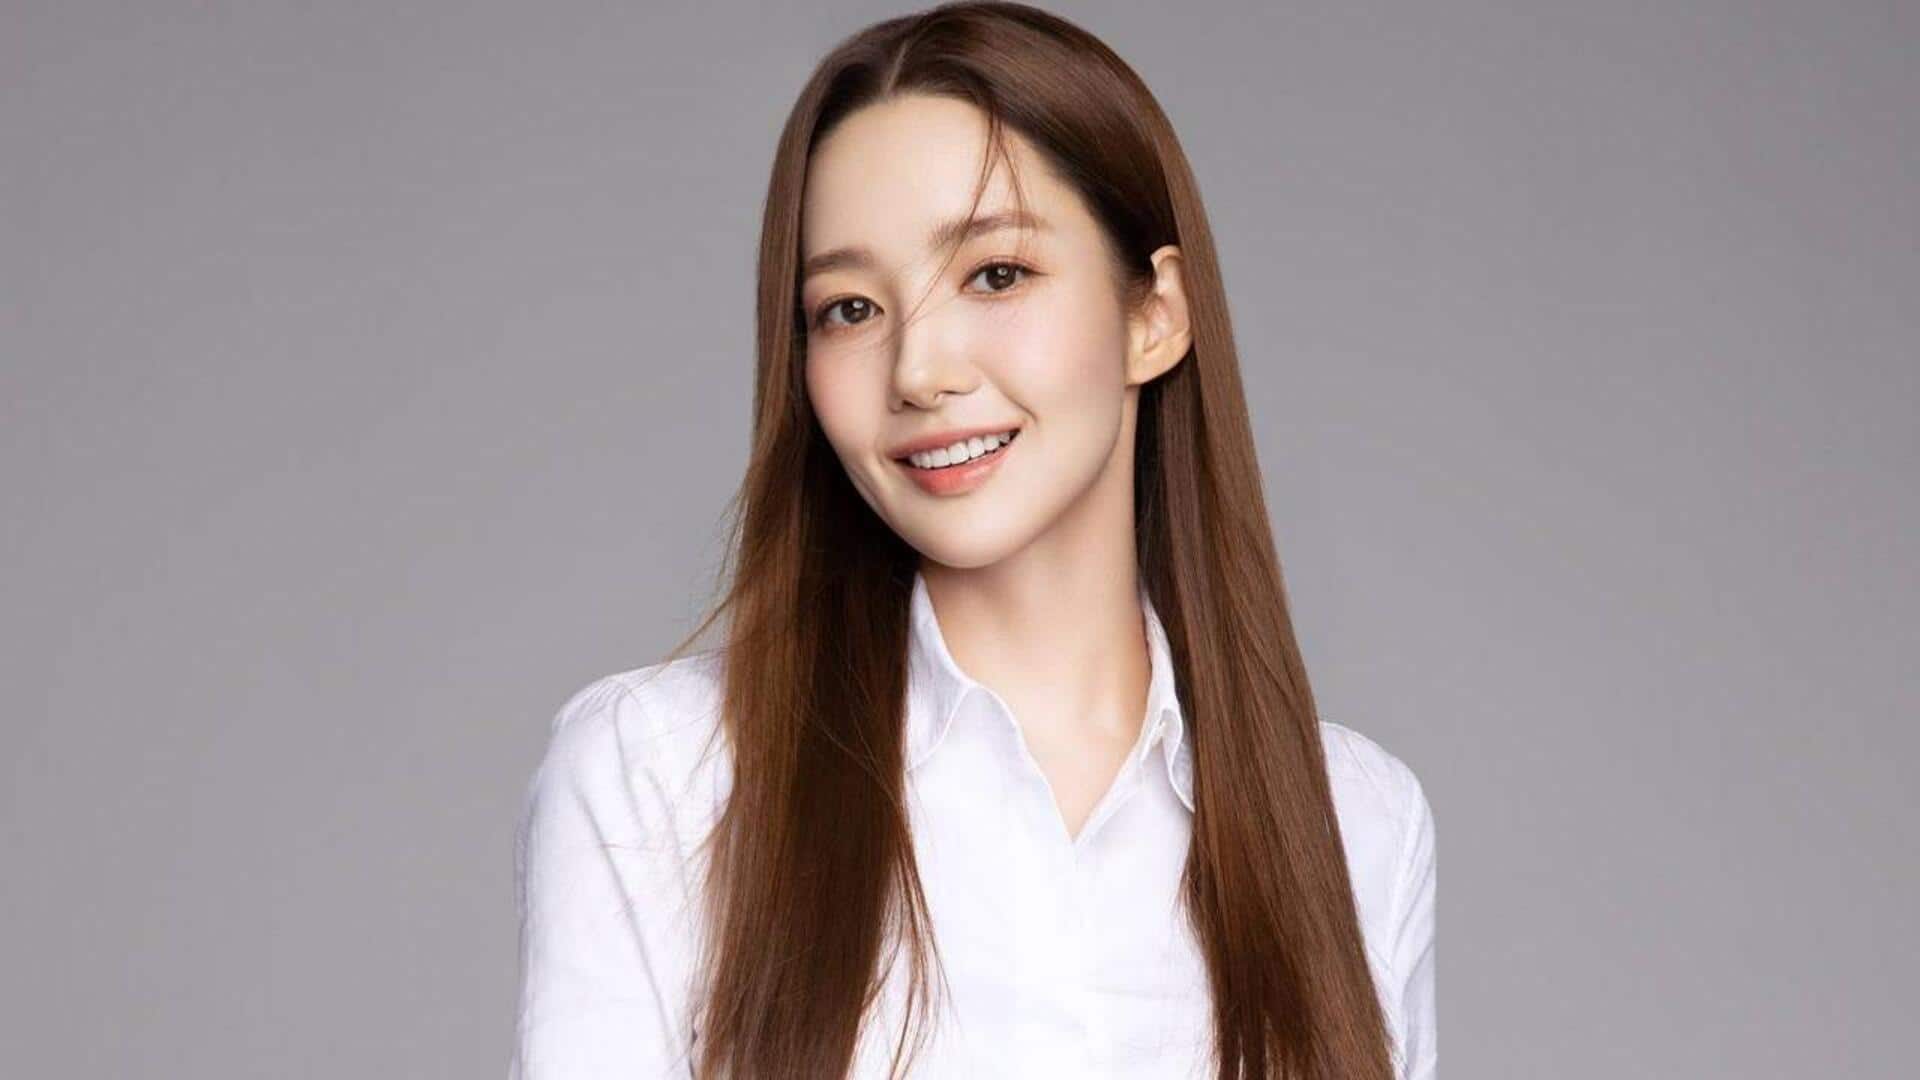 Park Min-young denies receiving 250M KRW from ex-boyfriend: Controversy explained